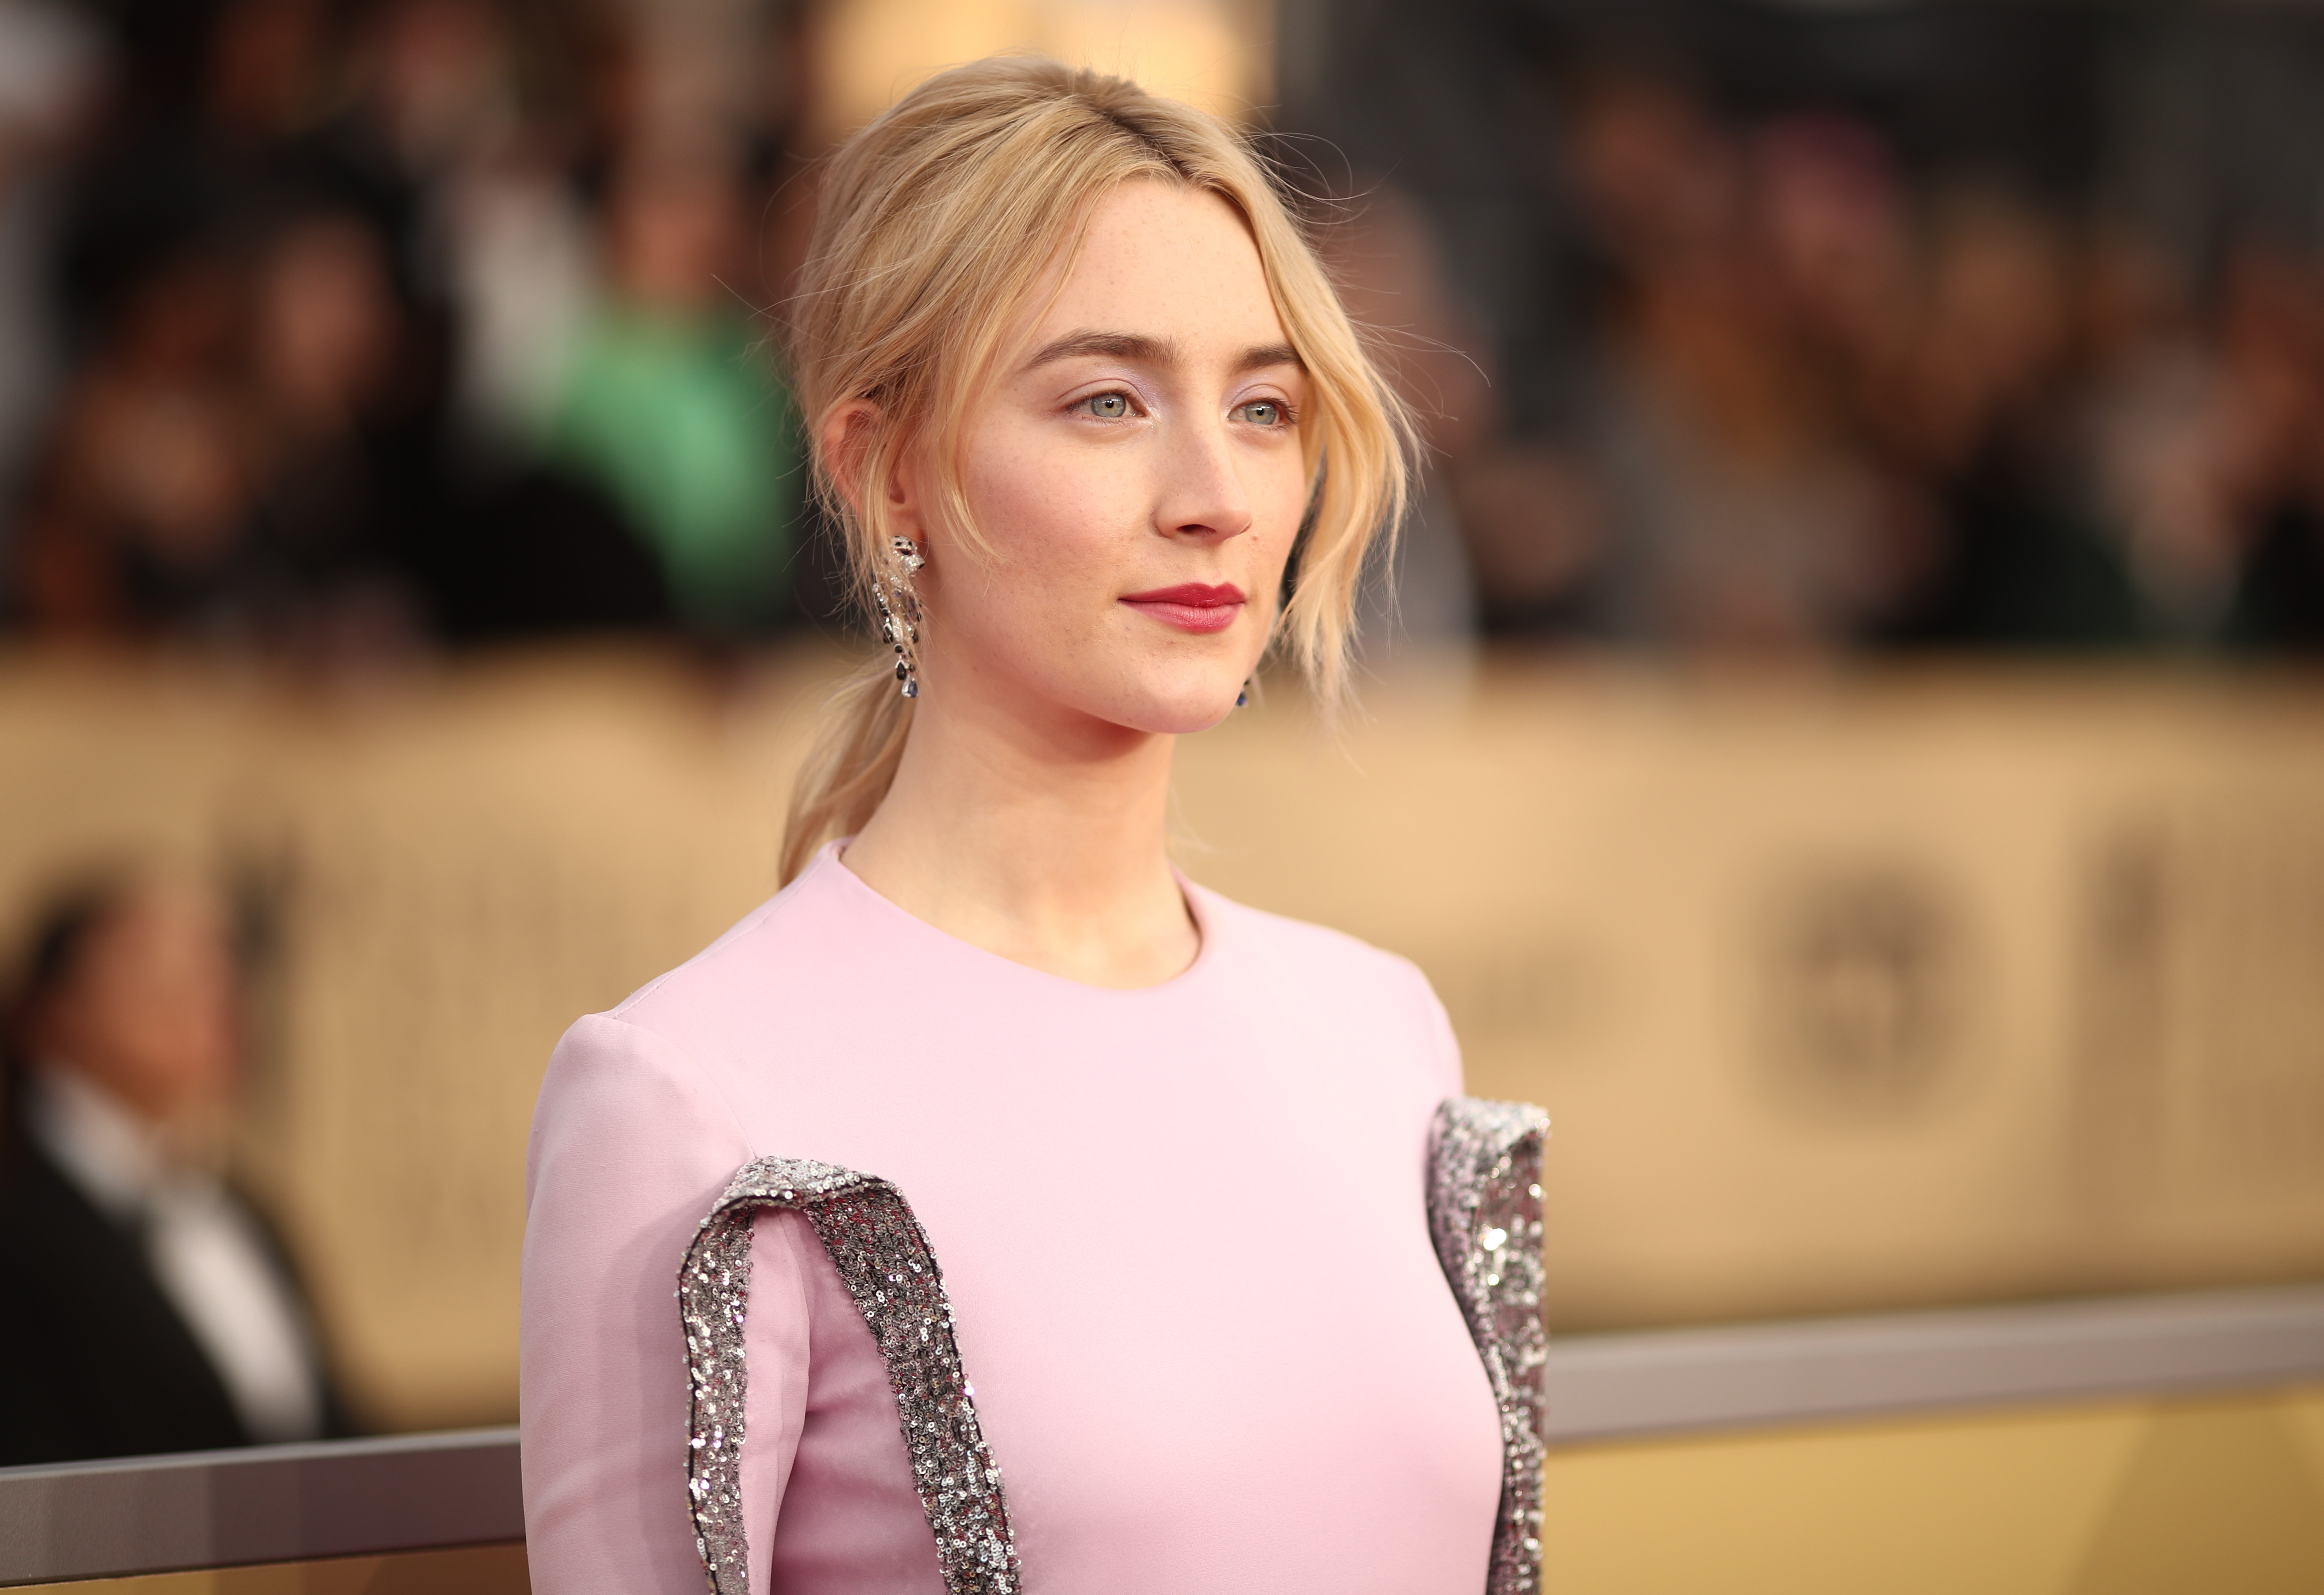 Saoirse Ronan just put her Wicklow house up for sale and the interiors are DIVINE